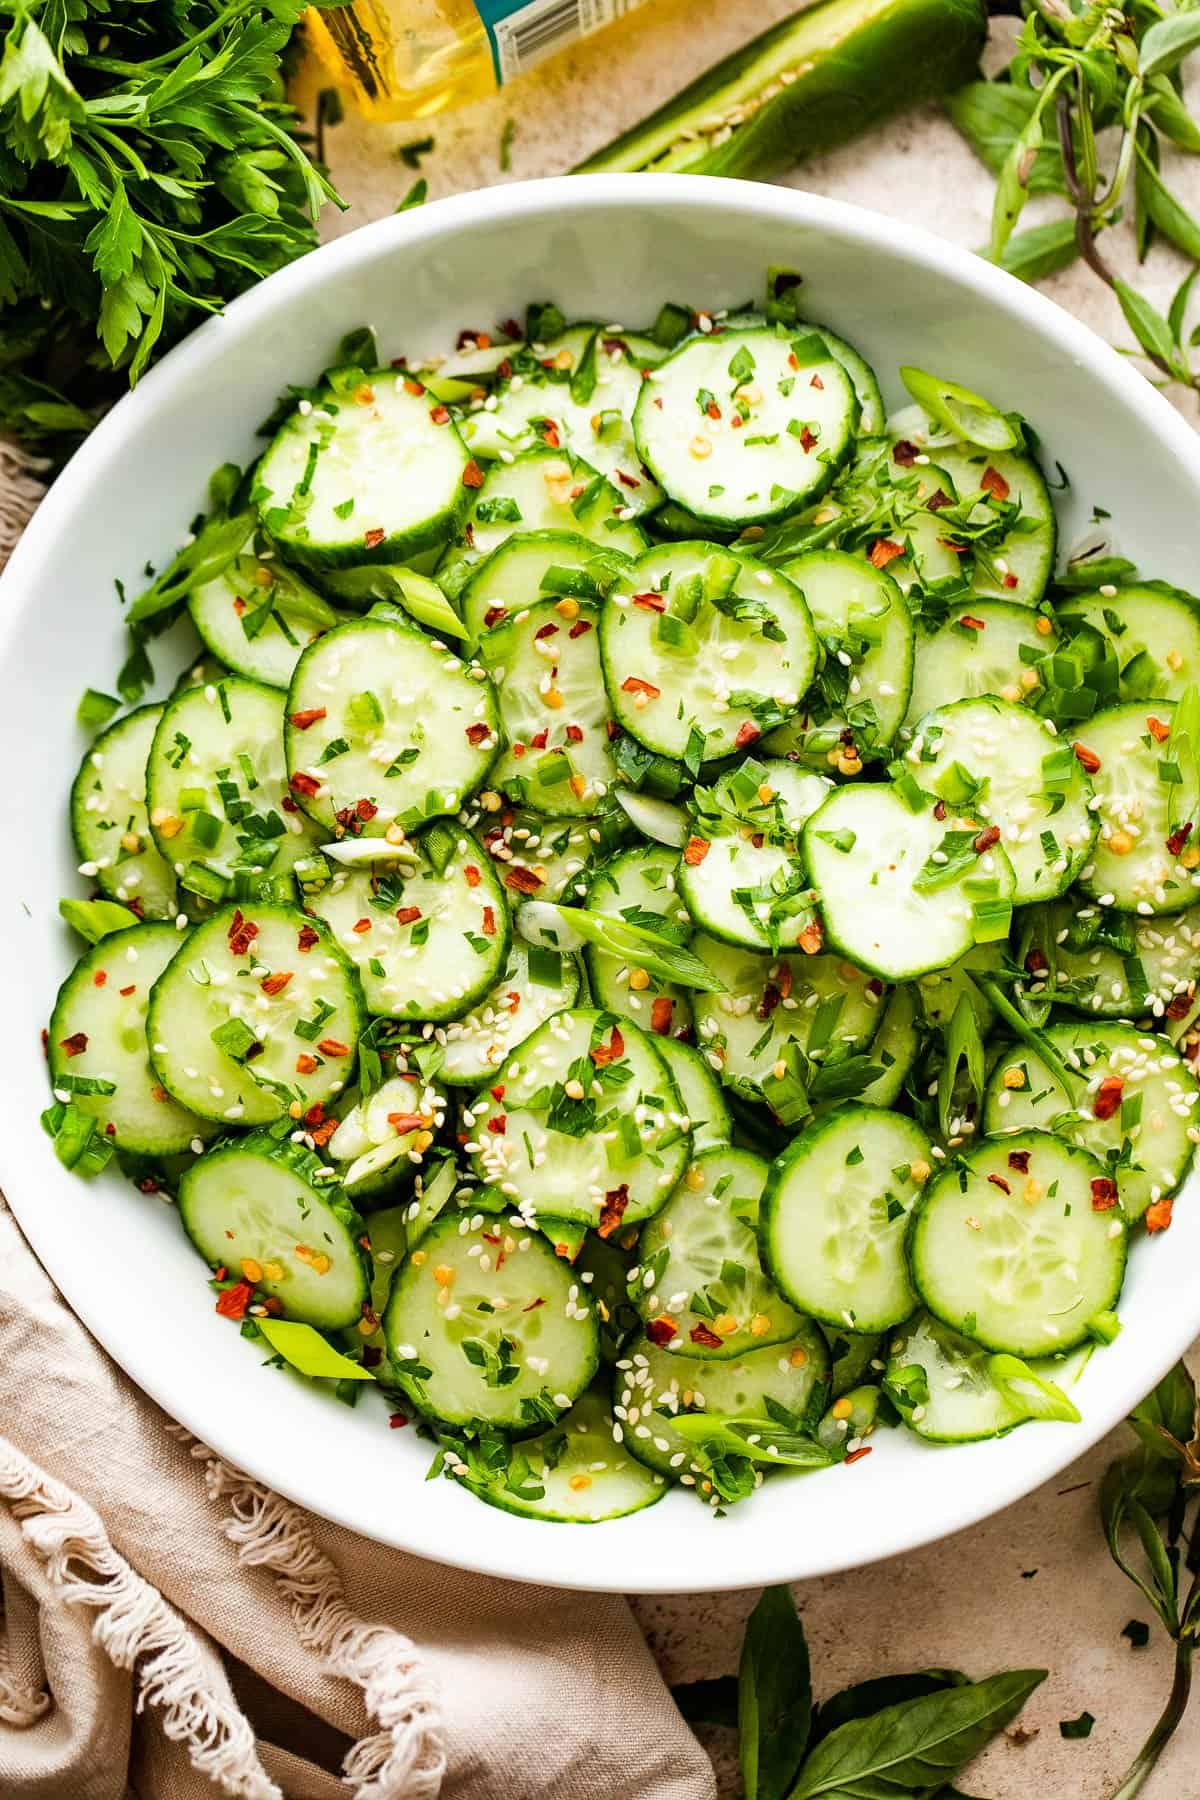 slices of cucumbers topped with sesame seeds, red pepper flakes, and green onions